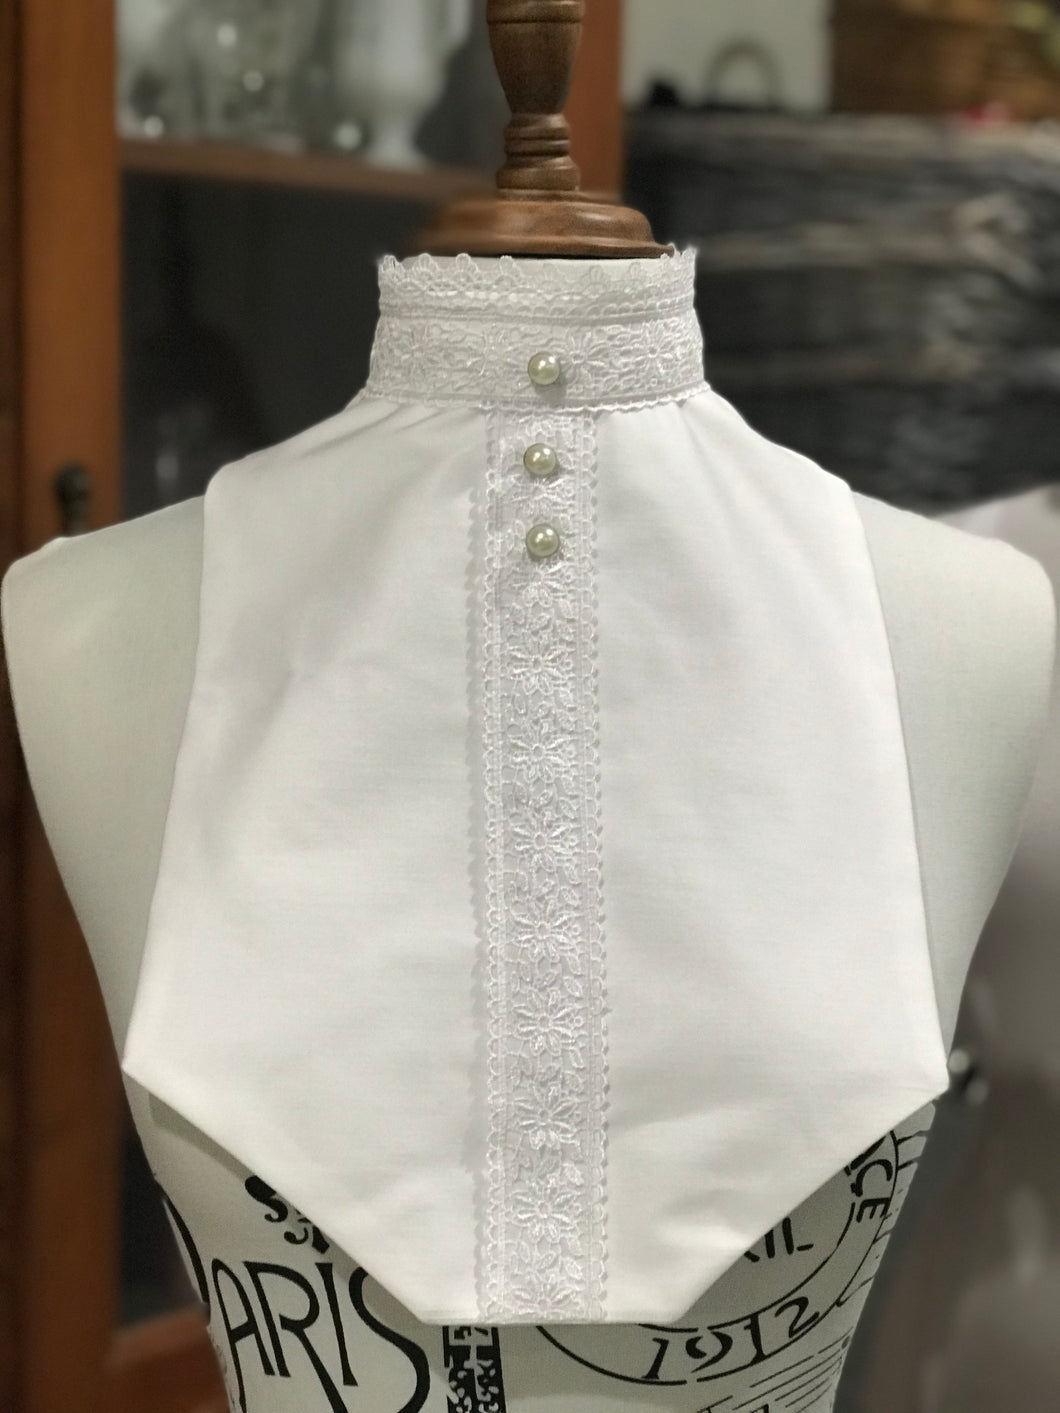 Bib in white sateen with lace collar and trim